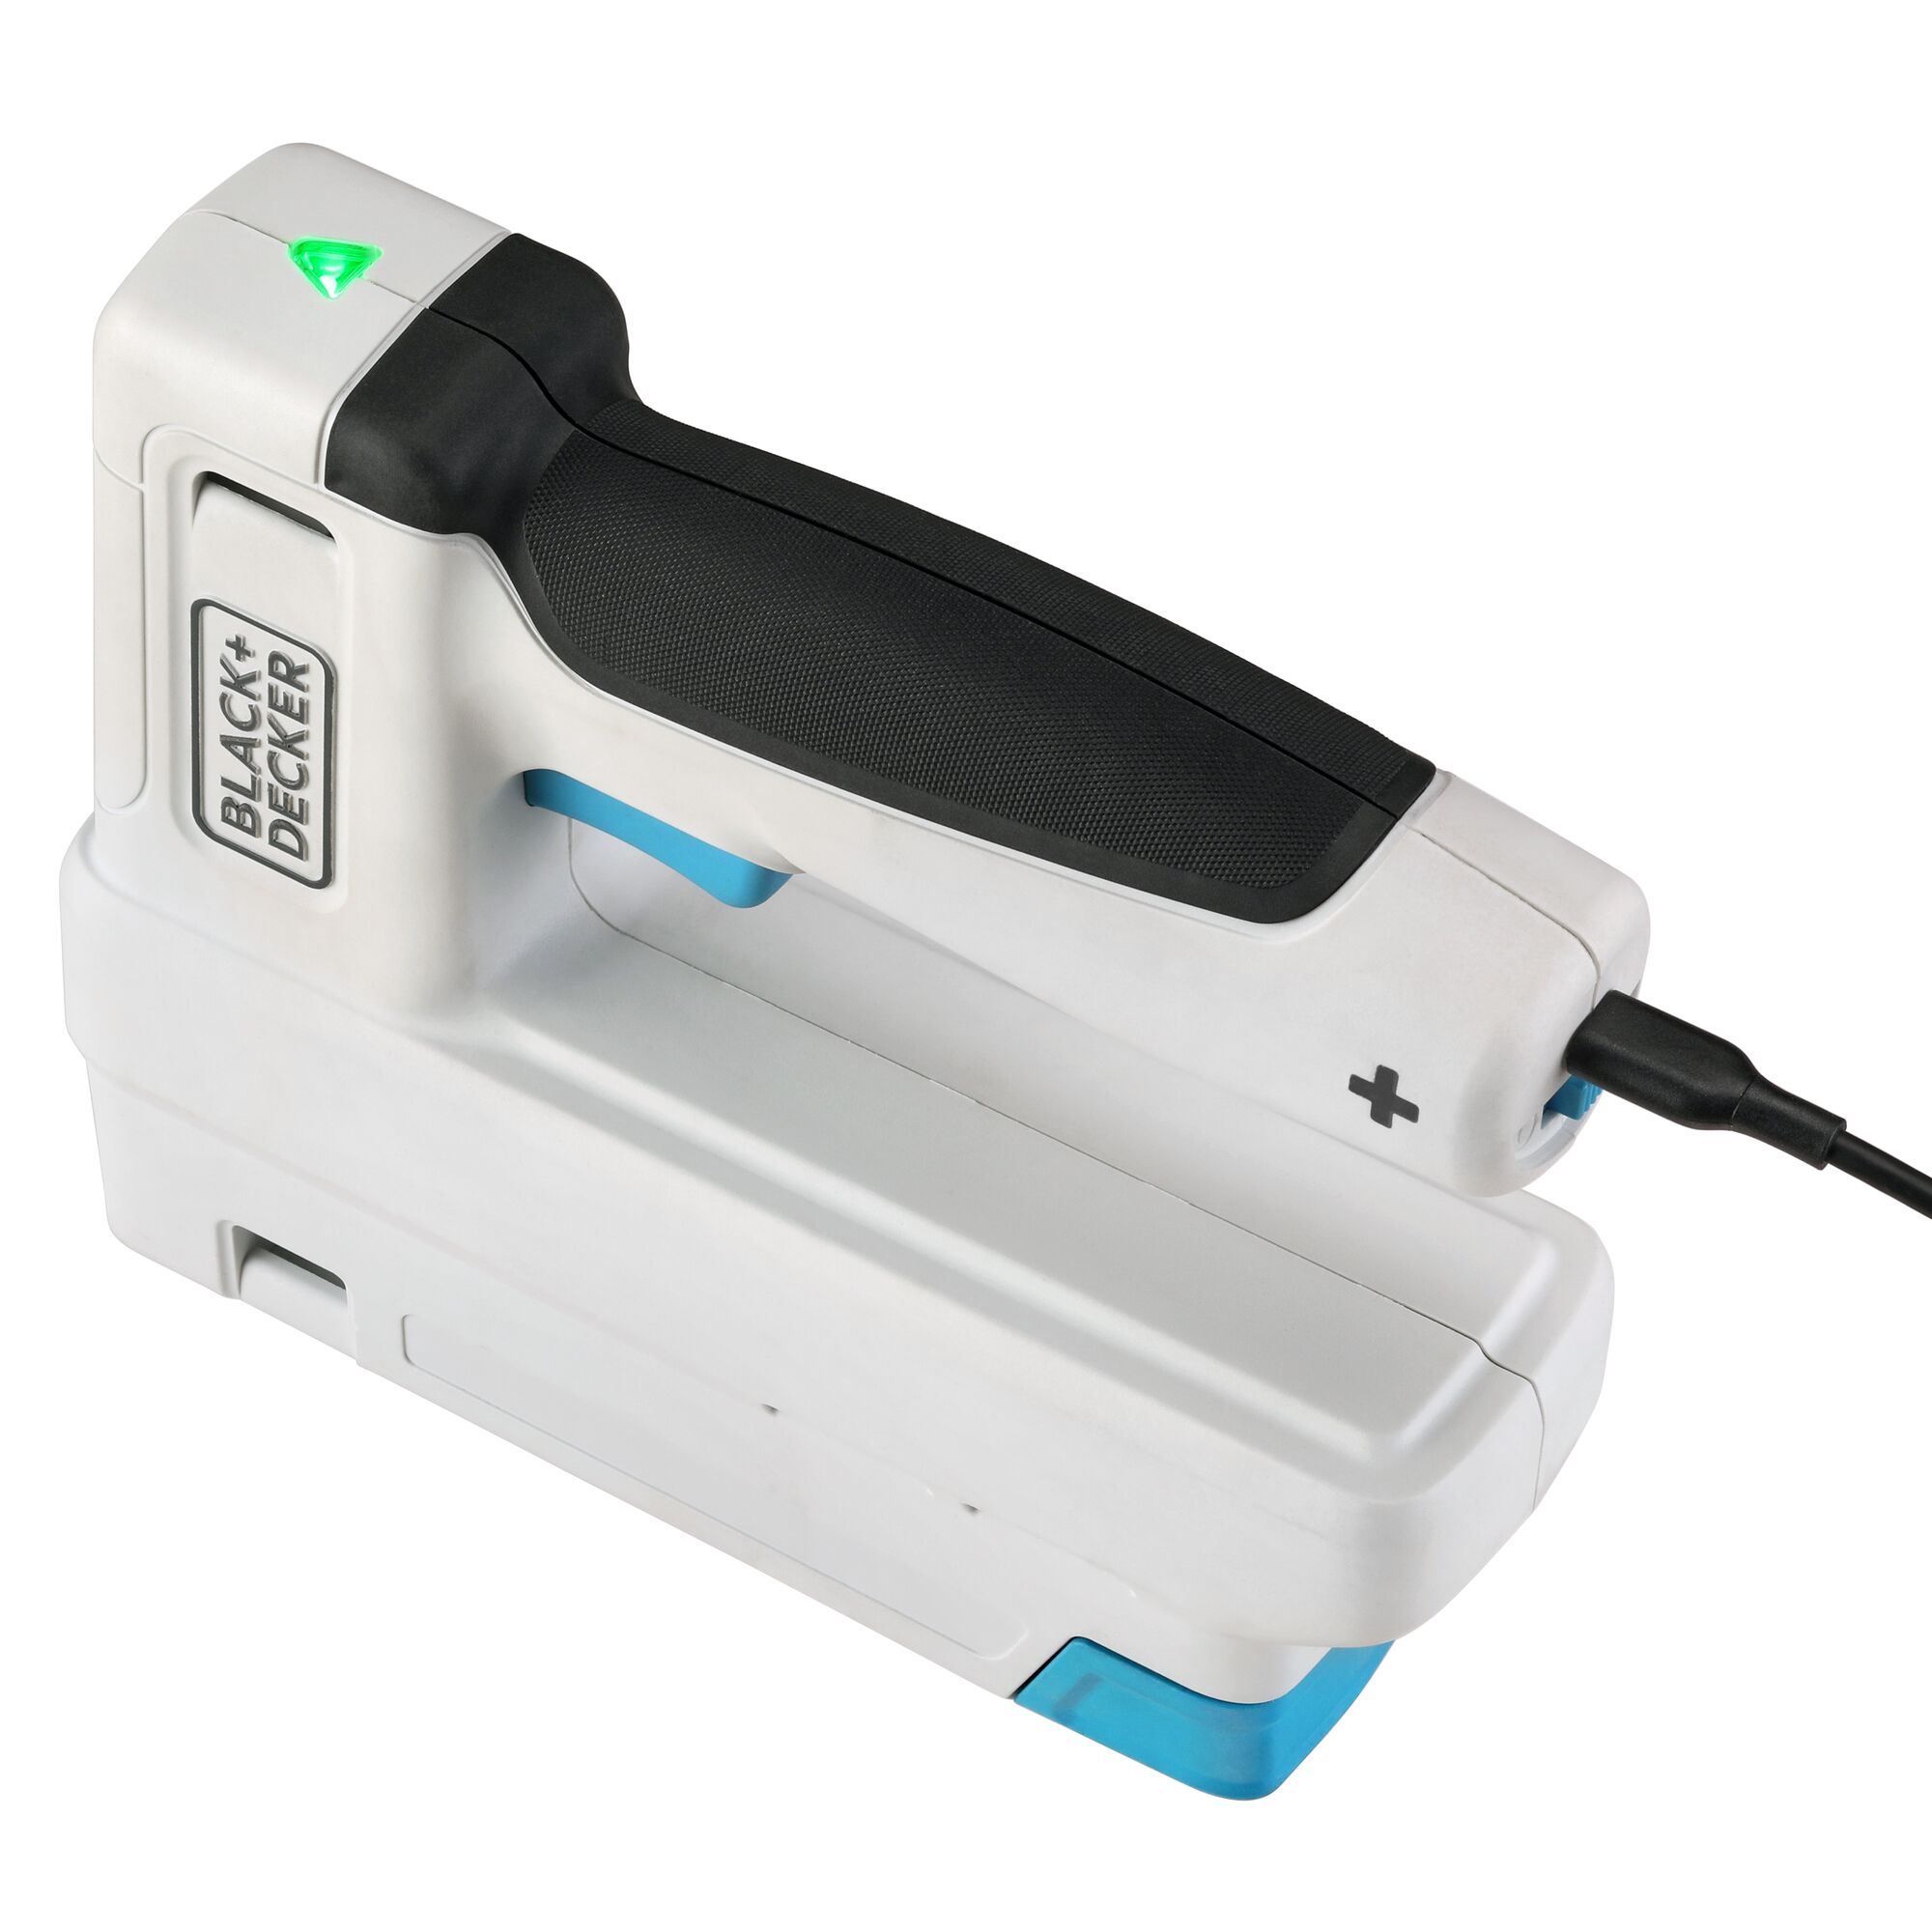 BLACK+DECKER cordless power stapler being charged, and LED is illuminated green indicating the battery is fully charged